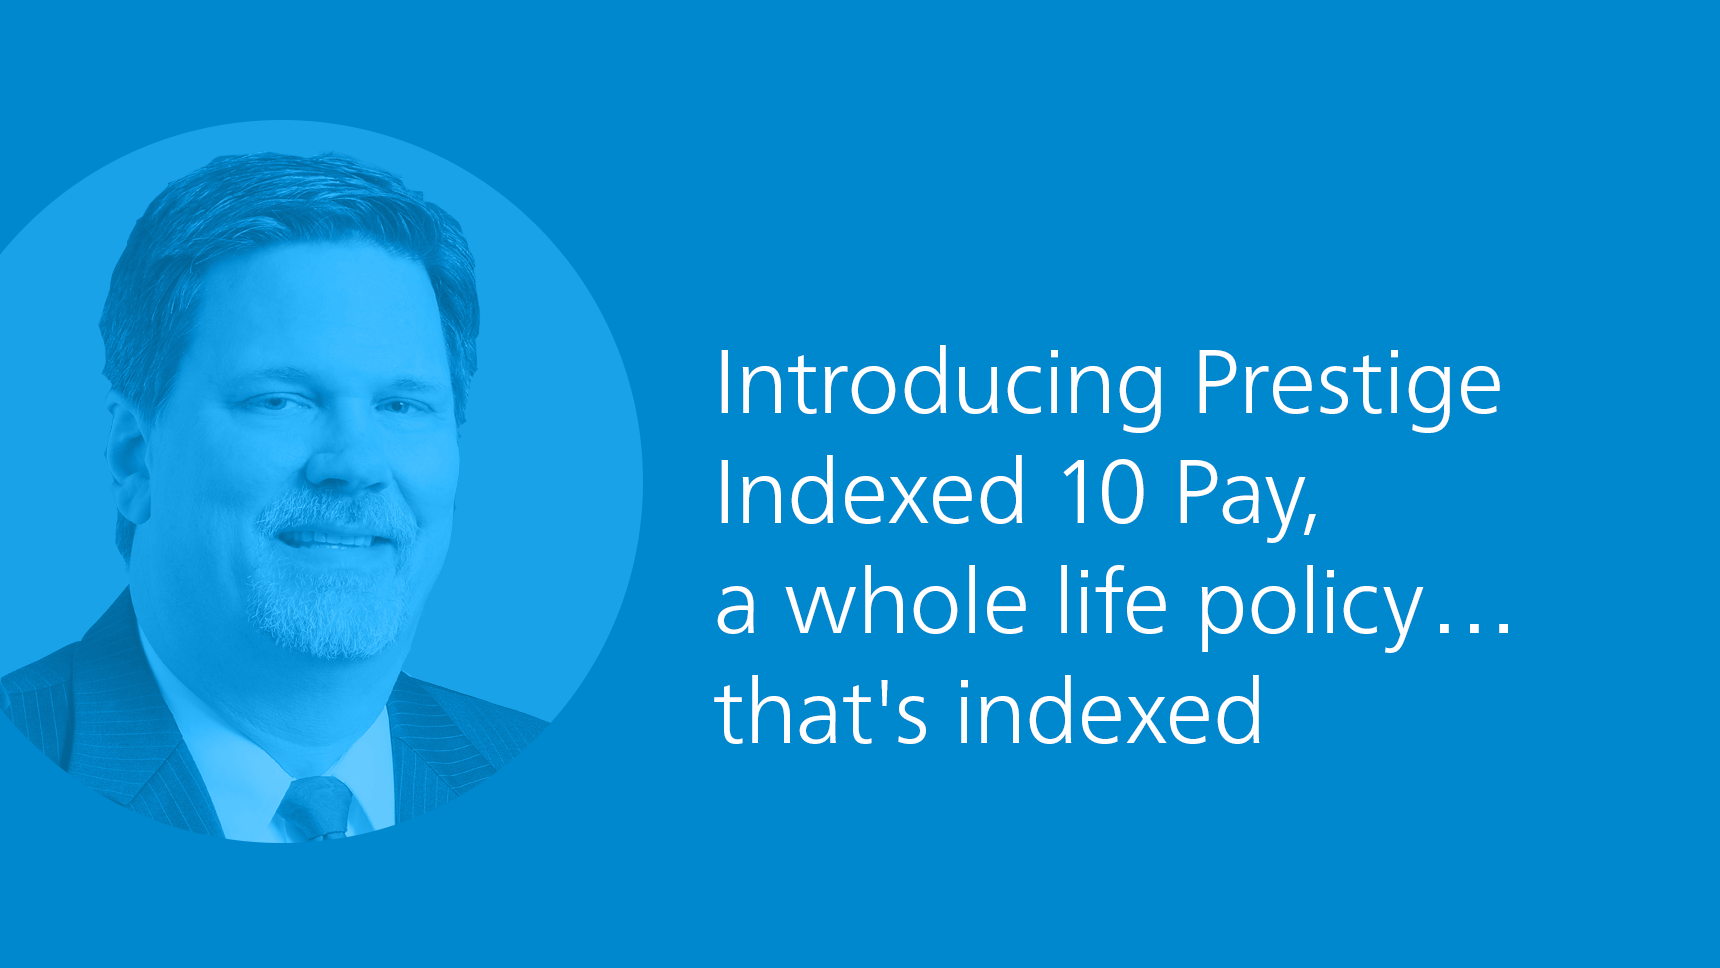 Introducing Prestige Indexed 10 Pay, a whole life policy...that's indexed